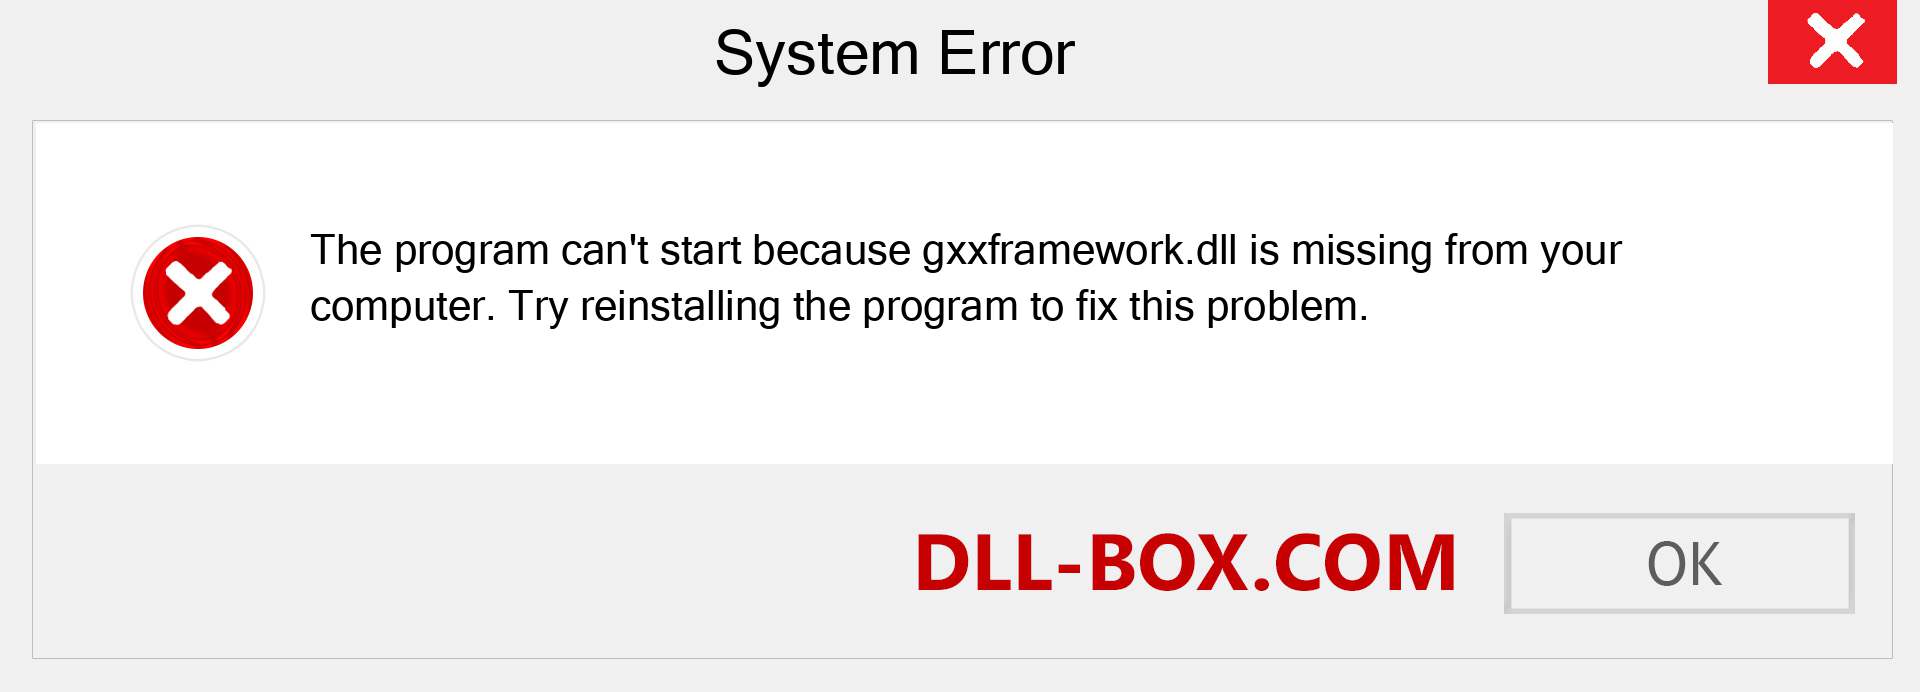  gxxframework.dll file is missing?. Download for Windows 7, 8, 10 - Fix  gxxframework dll Missing Error on Windows, photos, images